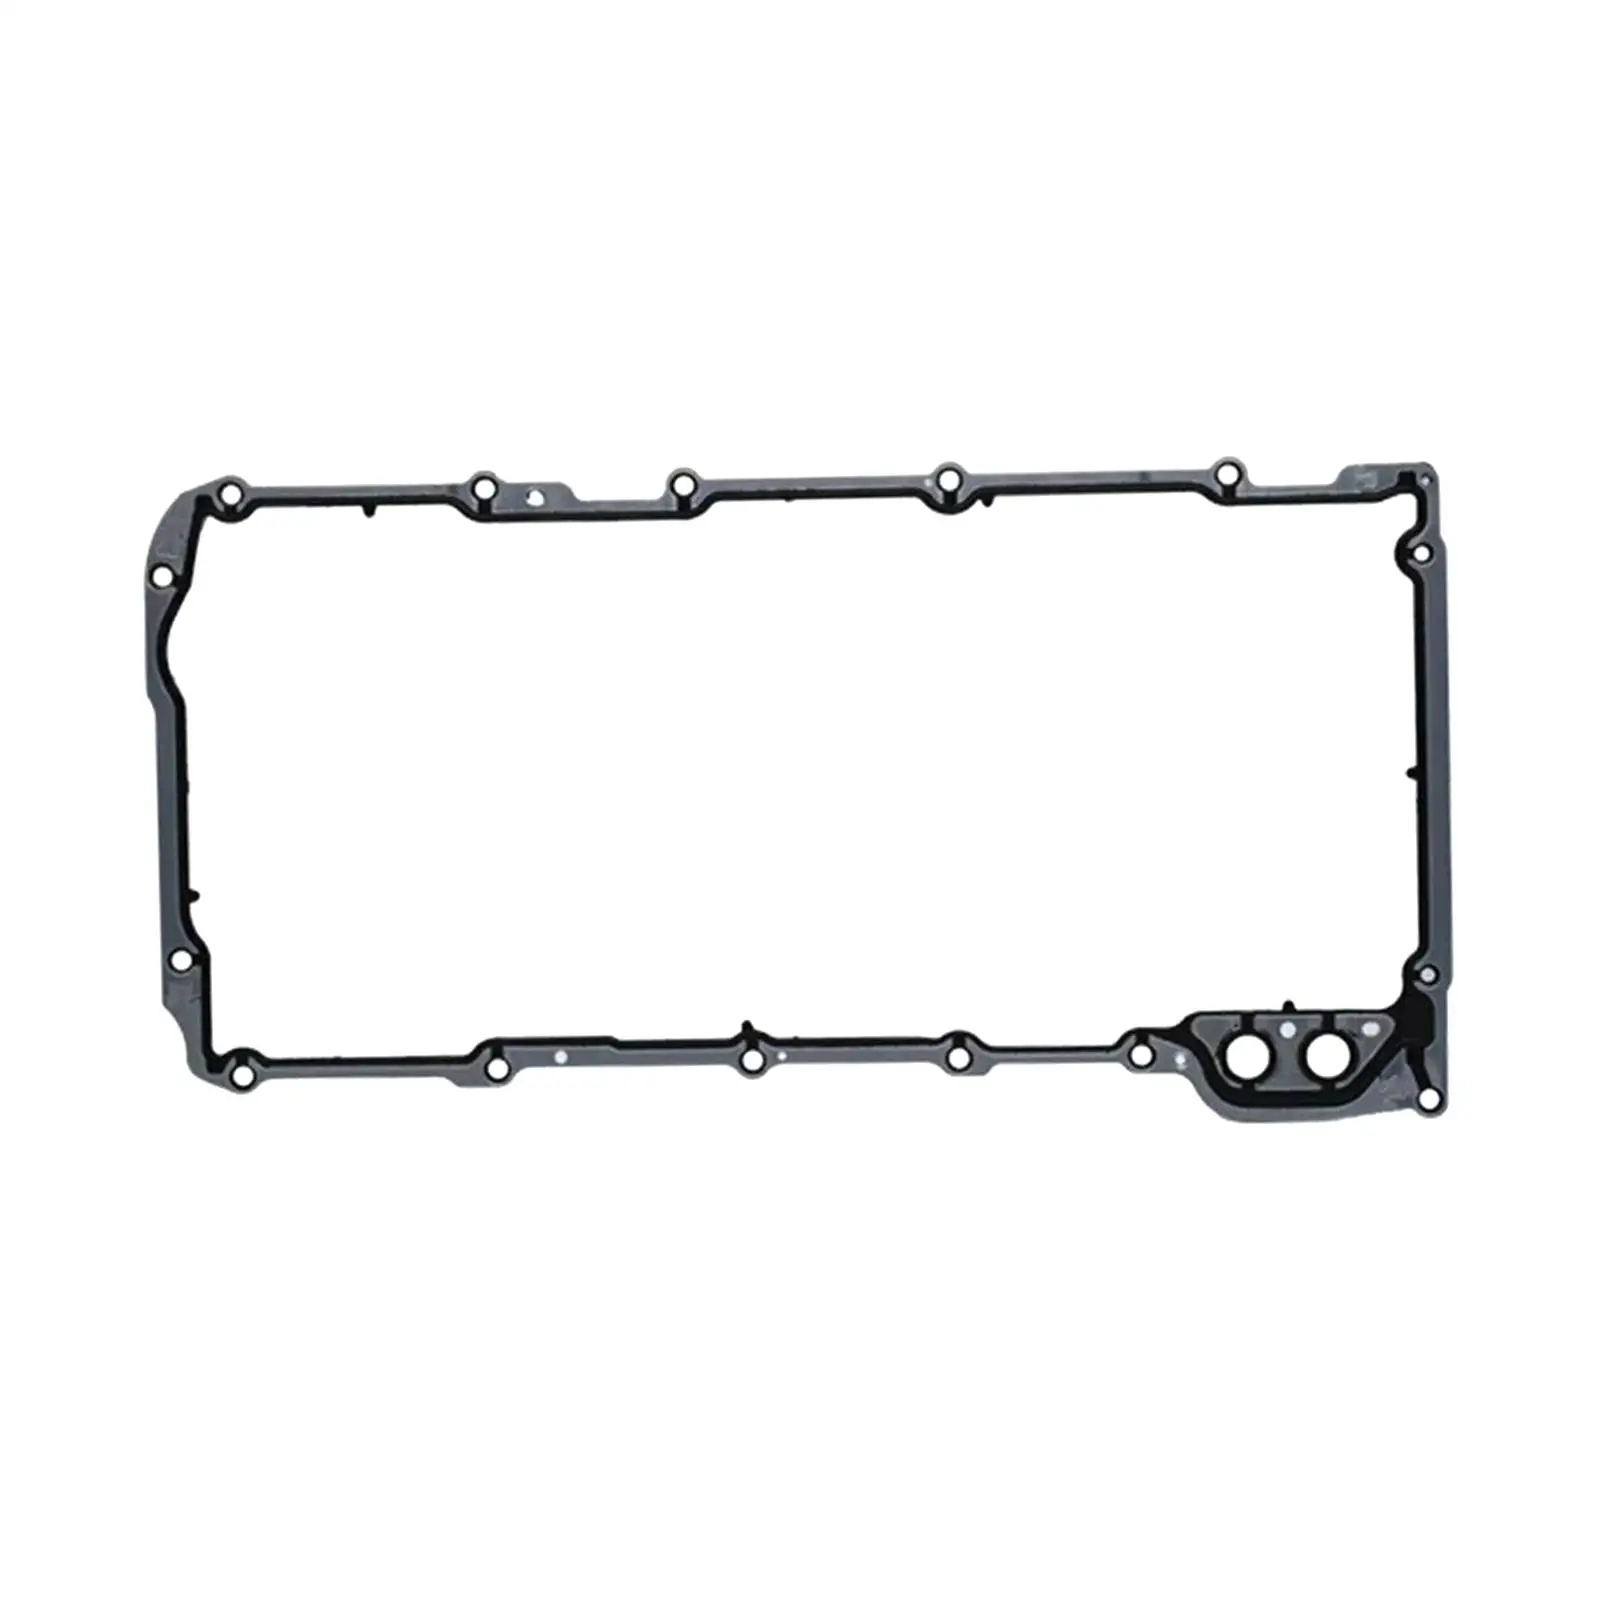 Engine Oil Pan Gasket OS32241 for Hummer Easy to Install Replacement